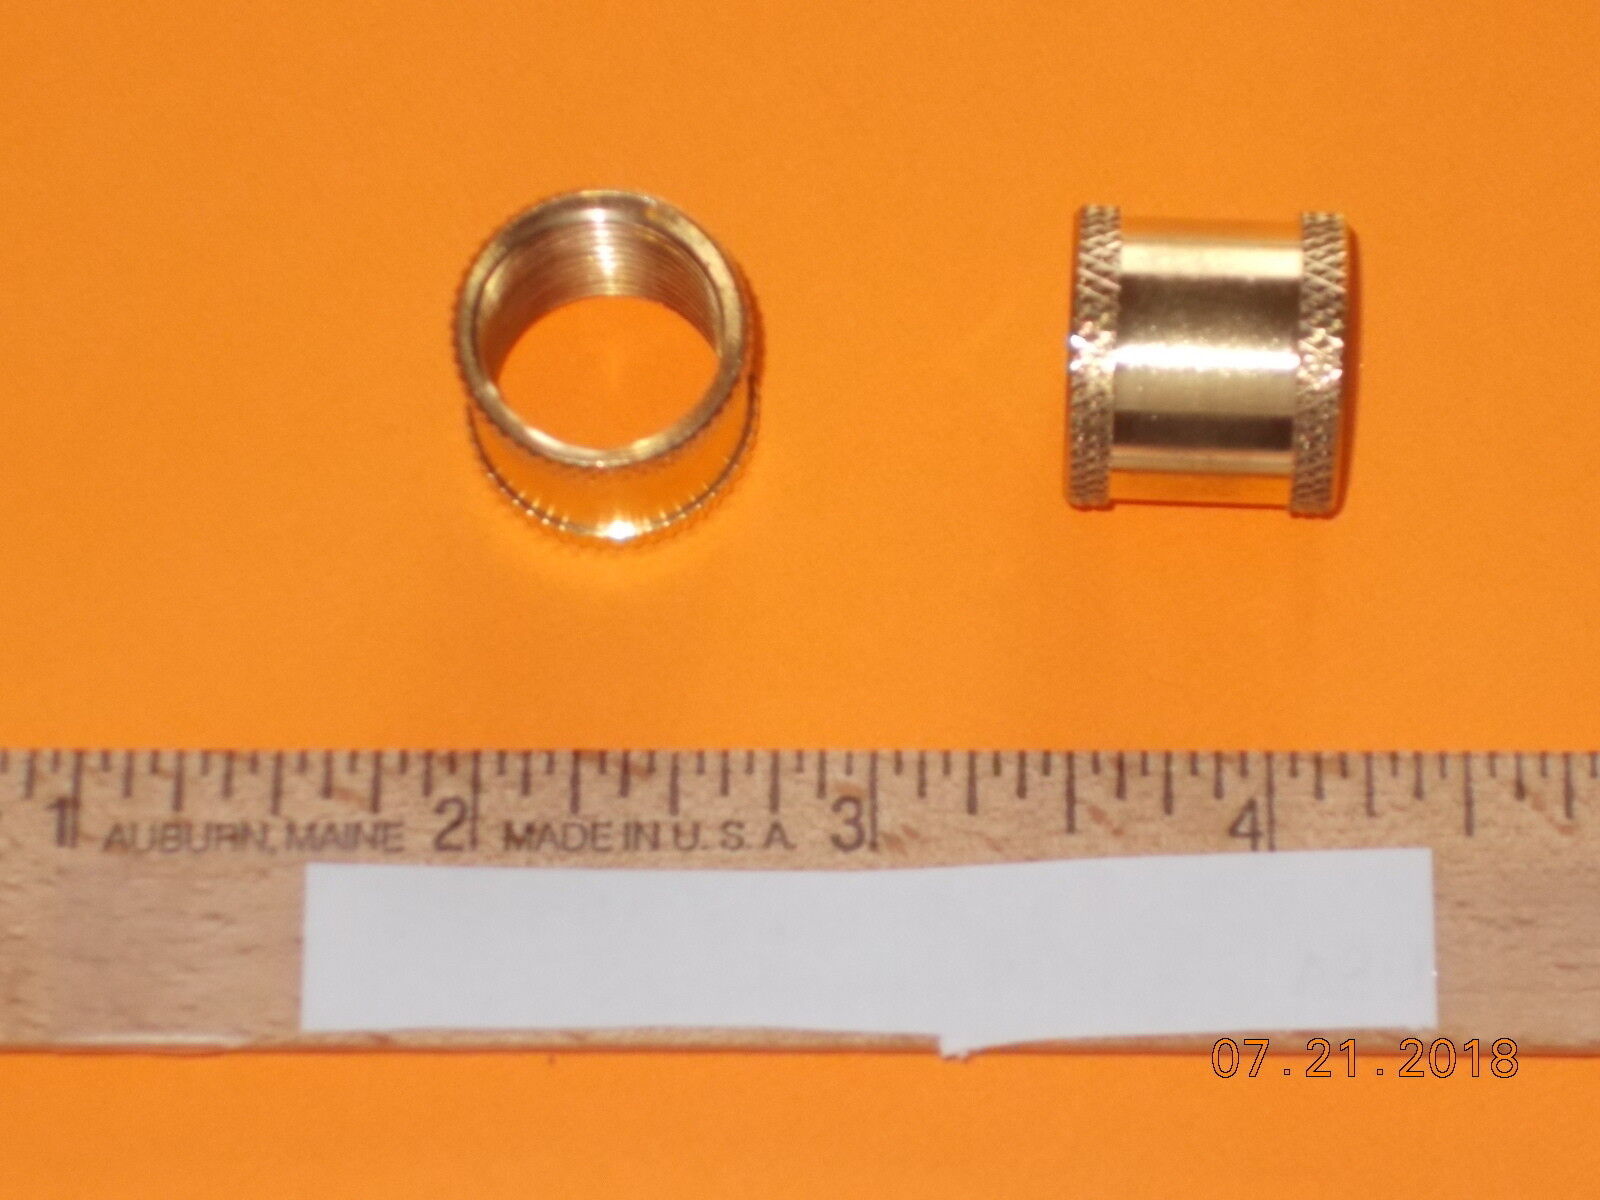 Tobacco Pipe parts & accessories - (1) Large chamber - brass - 5/8